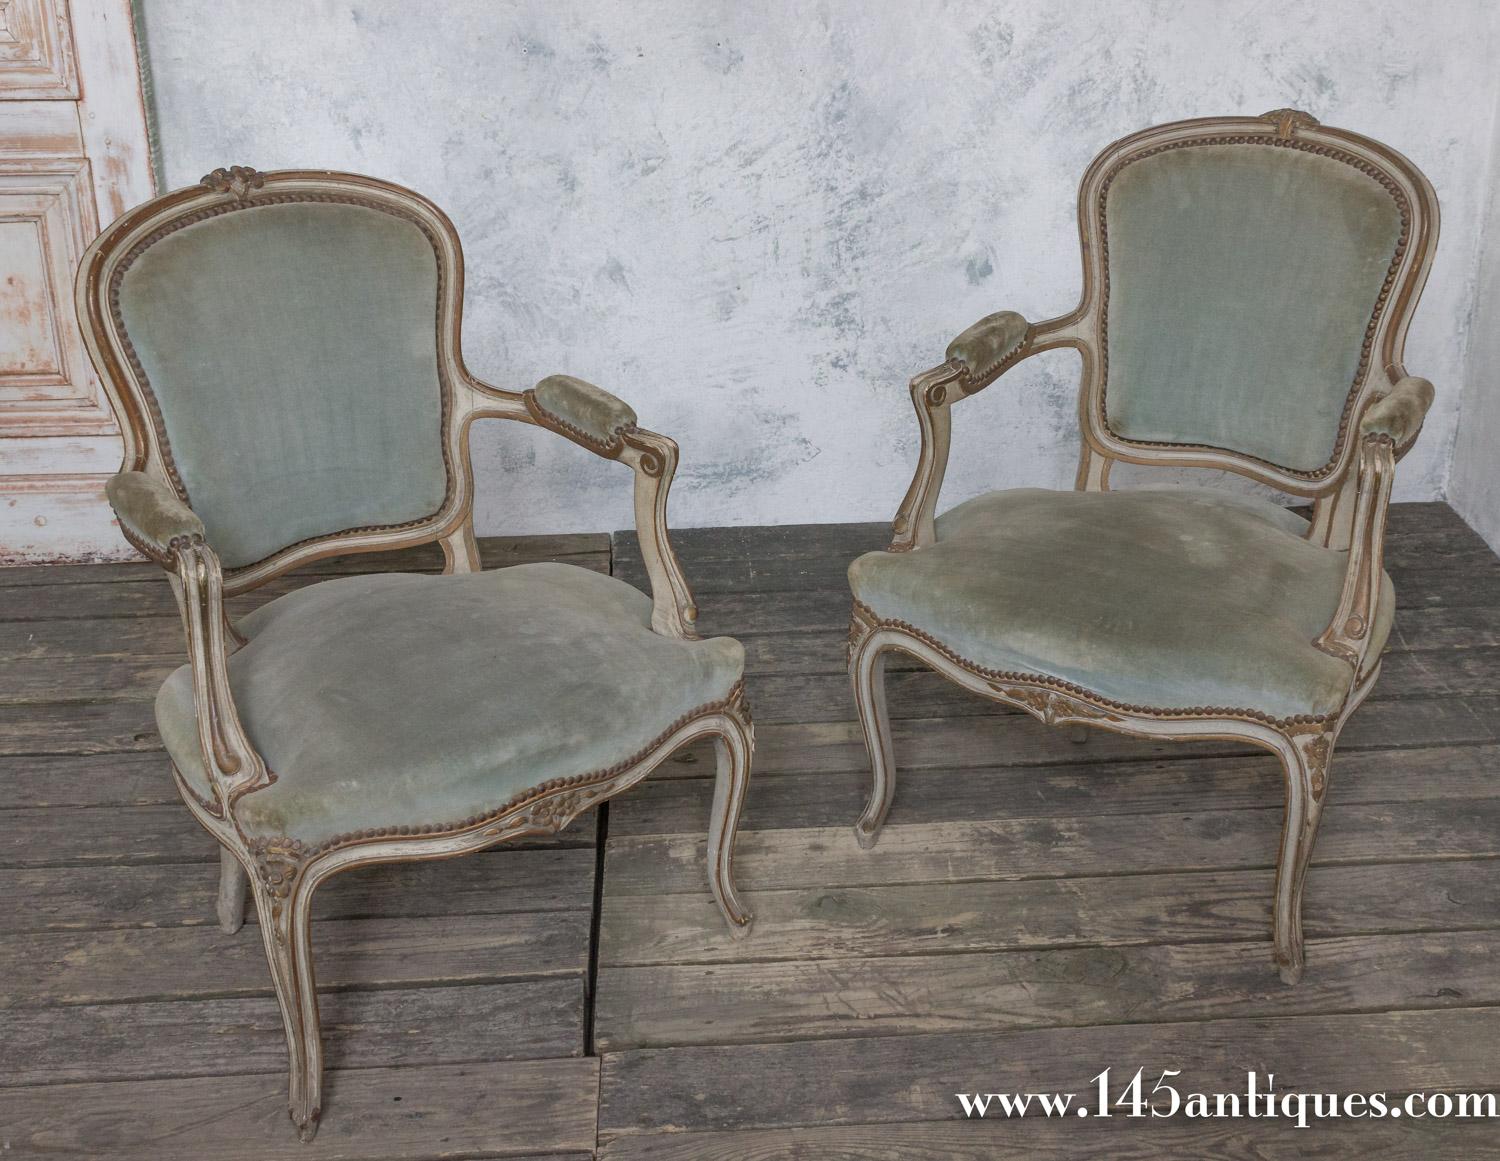 An exquisite pair of Louis XV style armchairs in sage green. Crafted with loving care in France during the early 20th century, this gorgeous pair of chairs exude an effortless grace. Finished with a hand patinated frame in creamy bluish grey, they